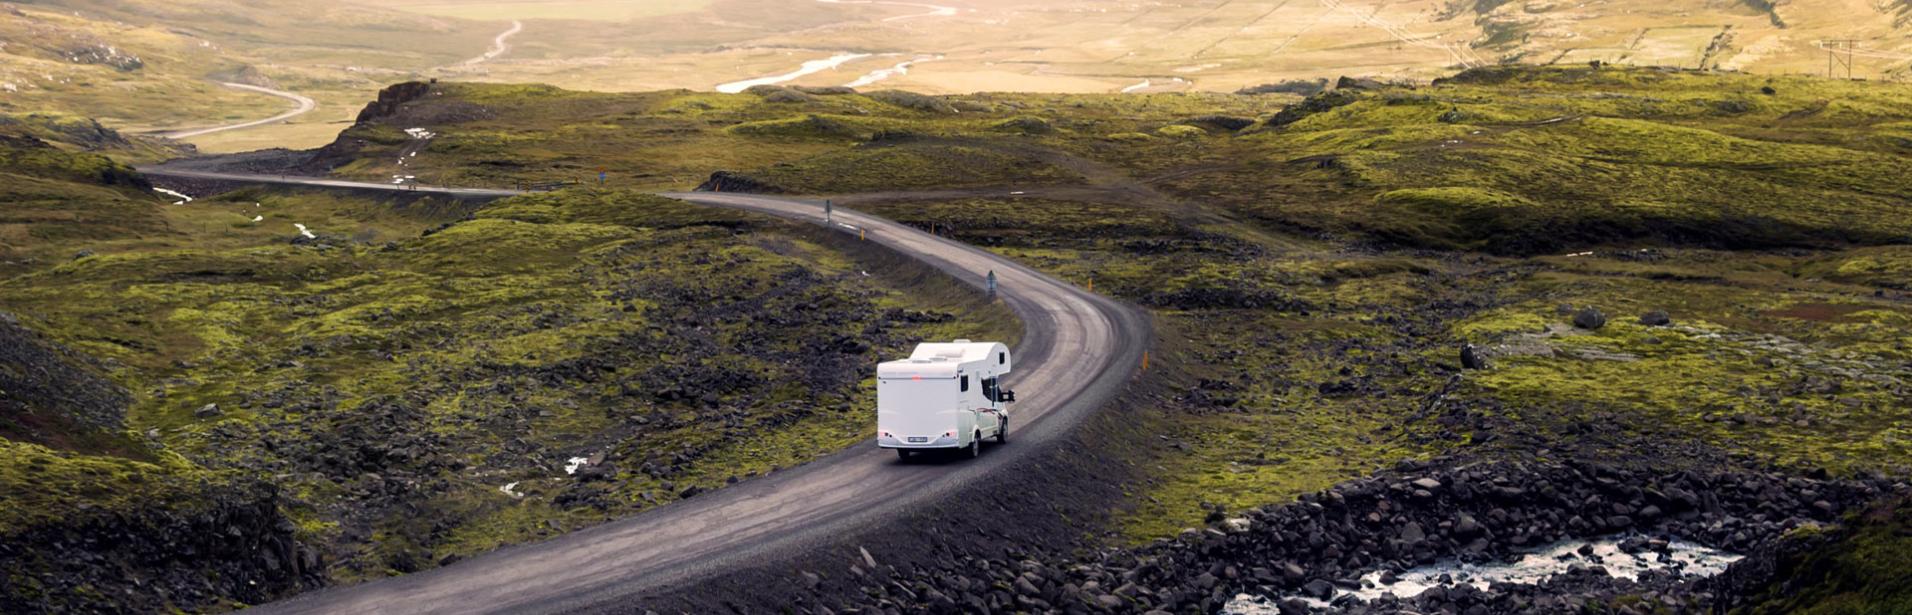 Roadtrip with camper in Iceland.